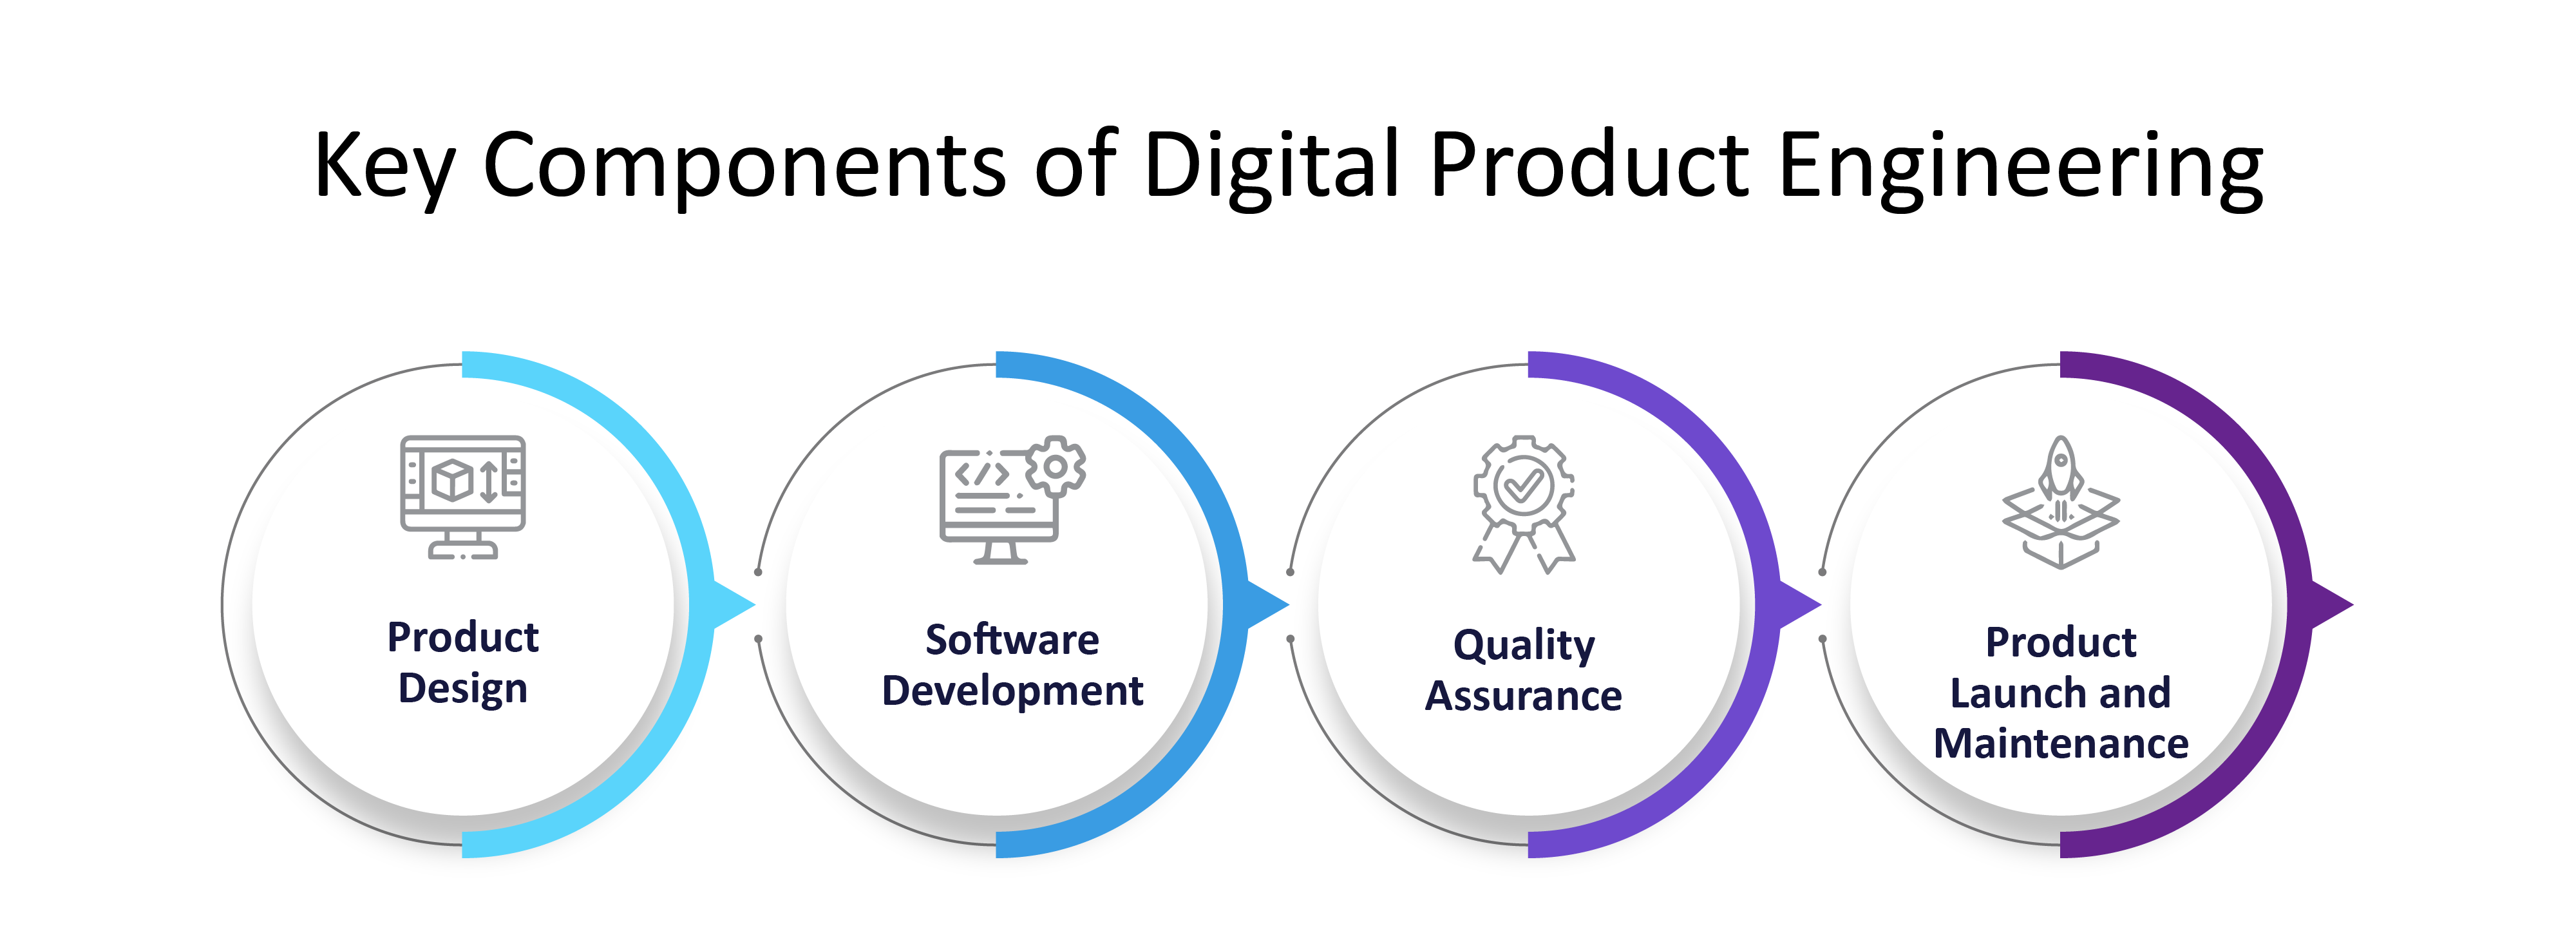 Key Components of Digital Product Engineering